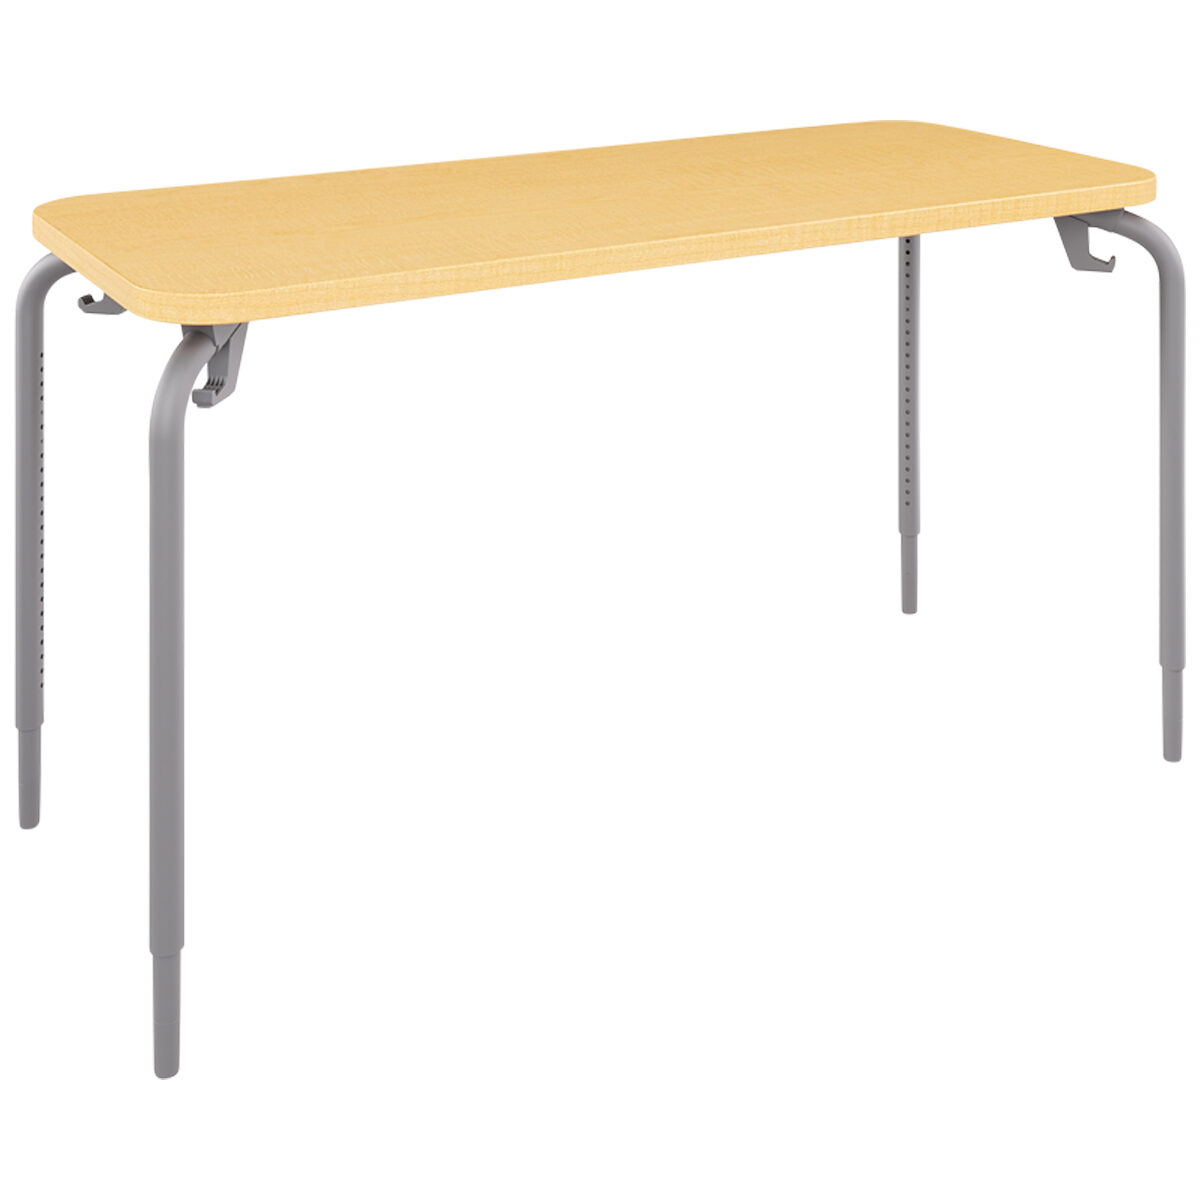 Adjustable Height Two-Student Desk, 24 x 54 in Fusion Maple